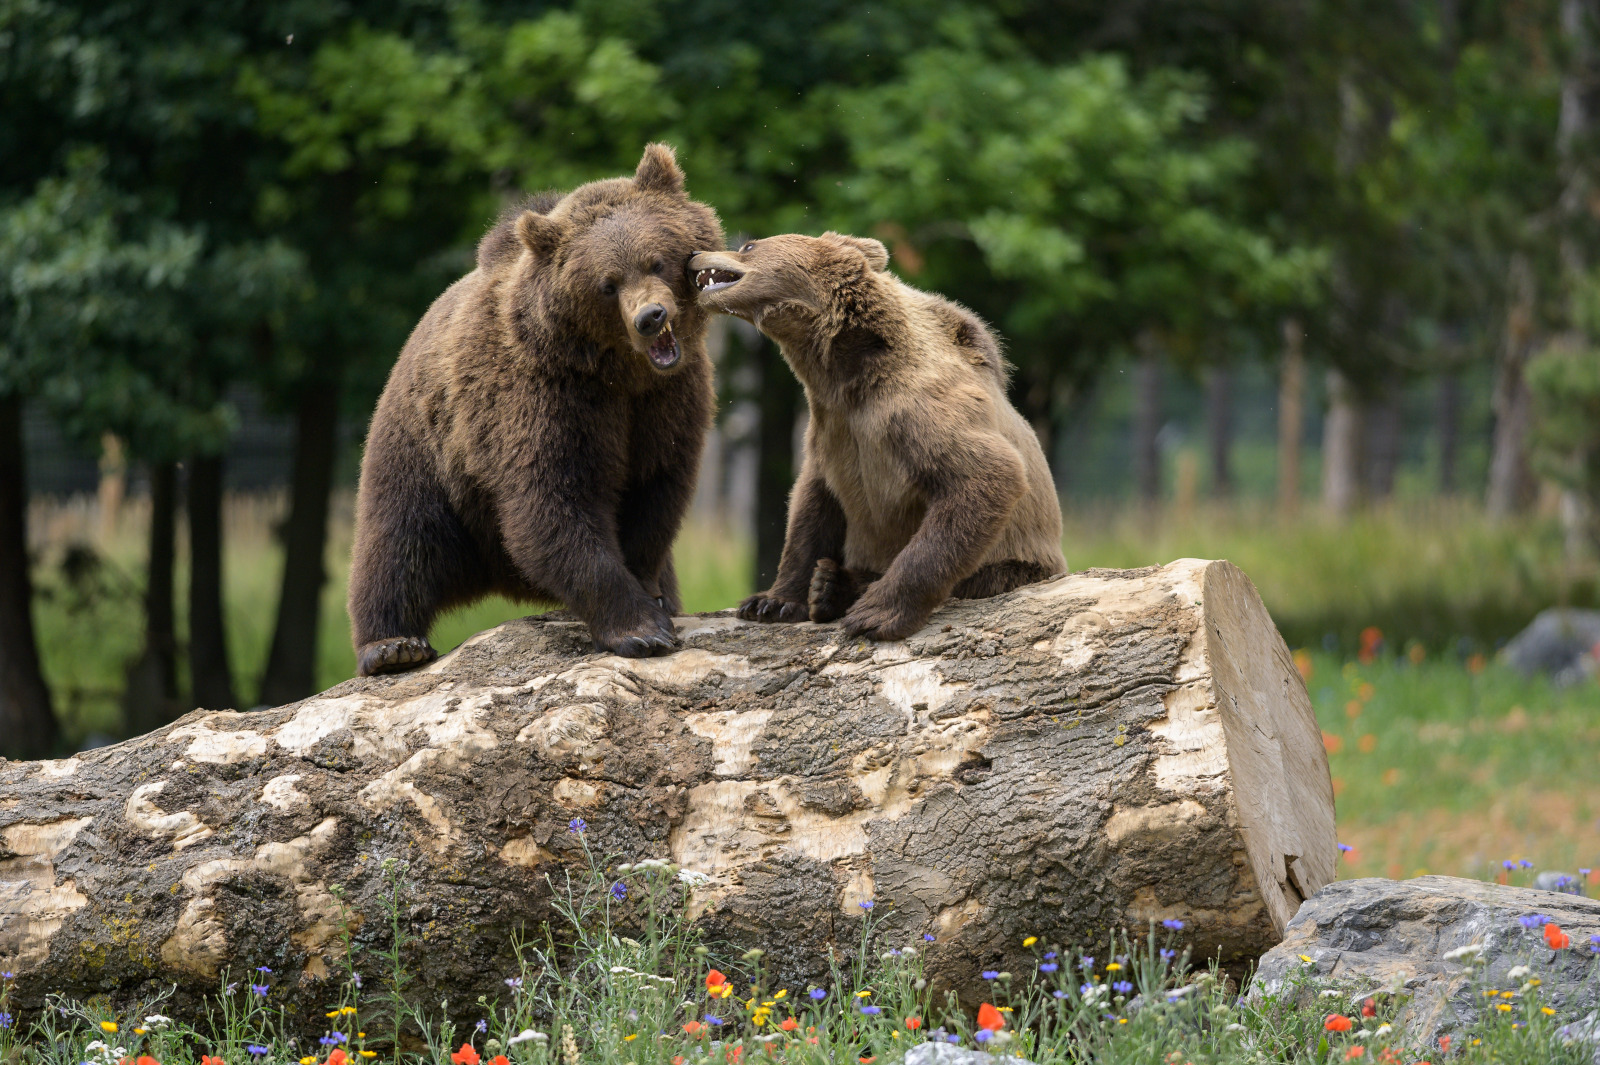 Two brown bears are bickering on a tree trunk in the Domaine des Grottes de Han animal park